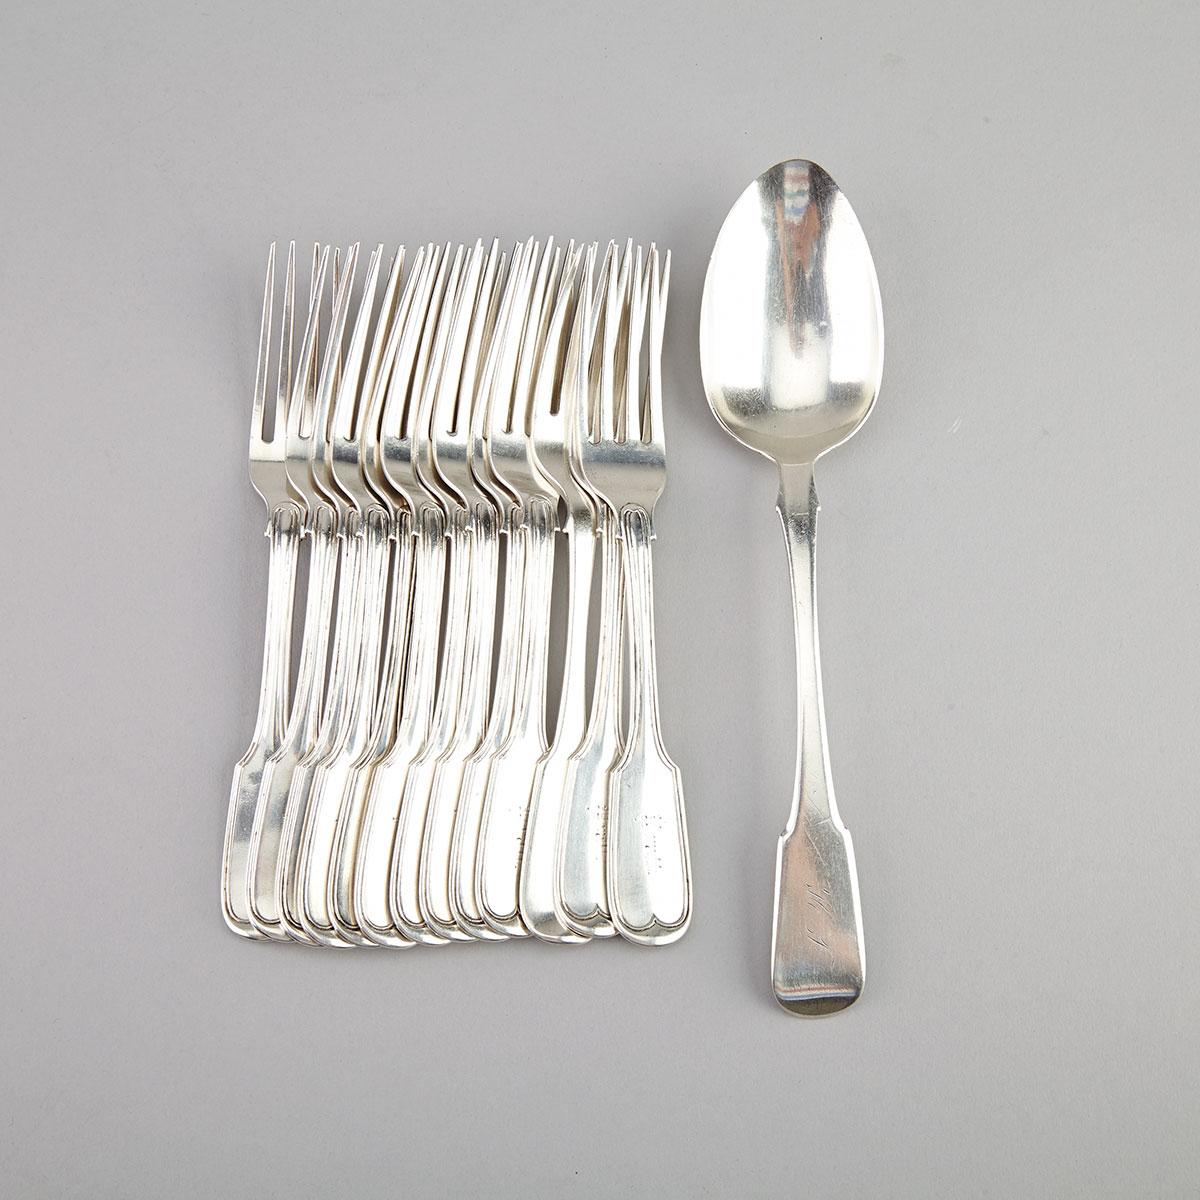 Twelve Canadian Silver Fiddle and Thread Pattern Dessert Forks, Savage & Lyman, together with a Fiddle Pattern Dessert Fork, George Savage and a Table Spoon, Nelson Walker, Montreal, Que., mid-19th century